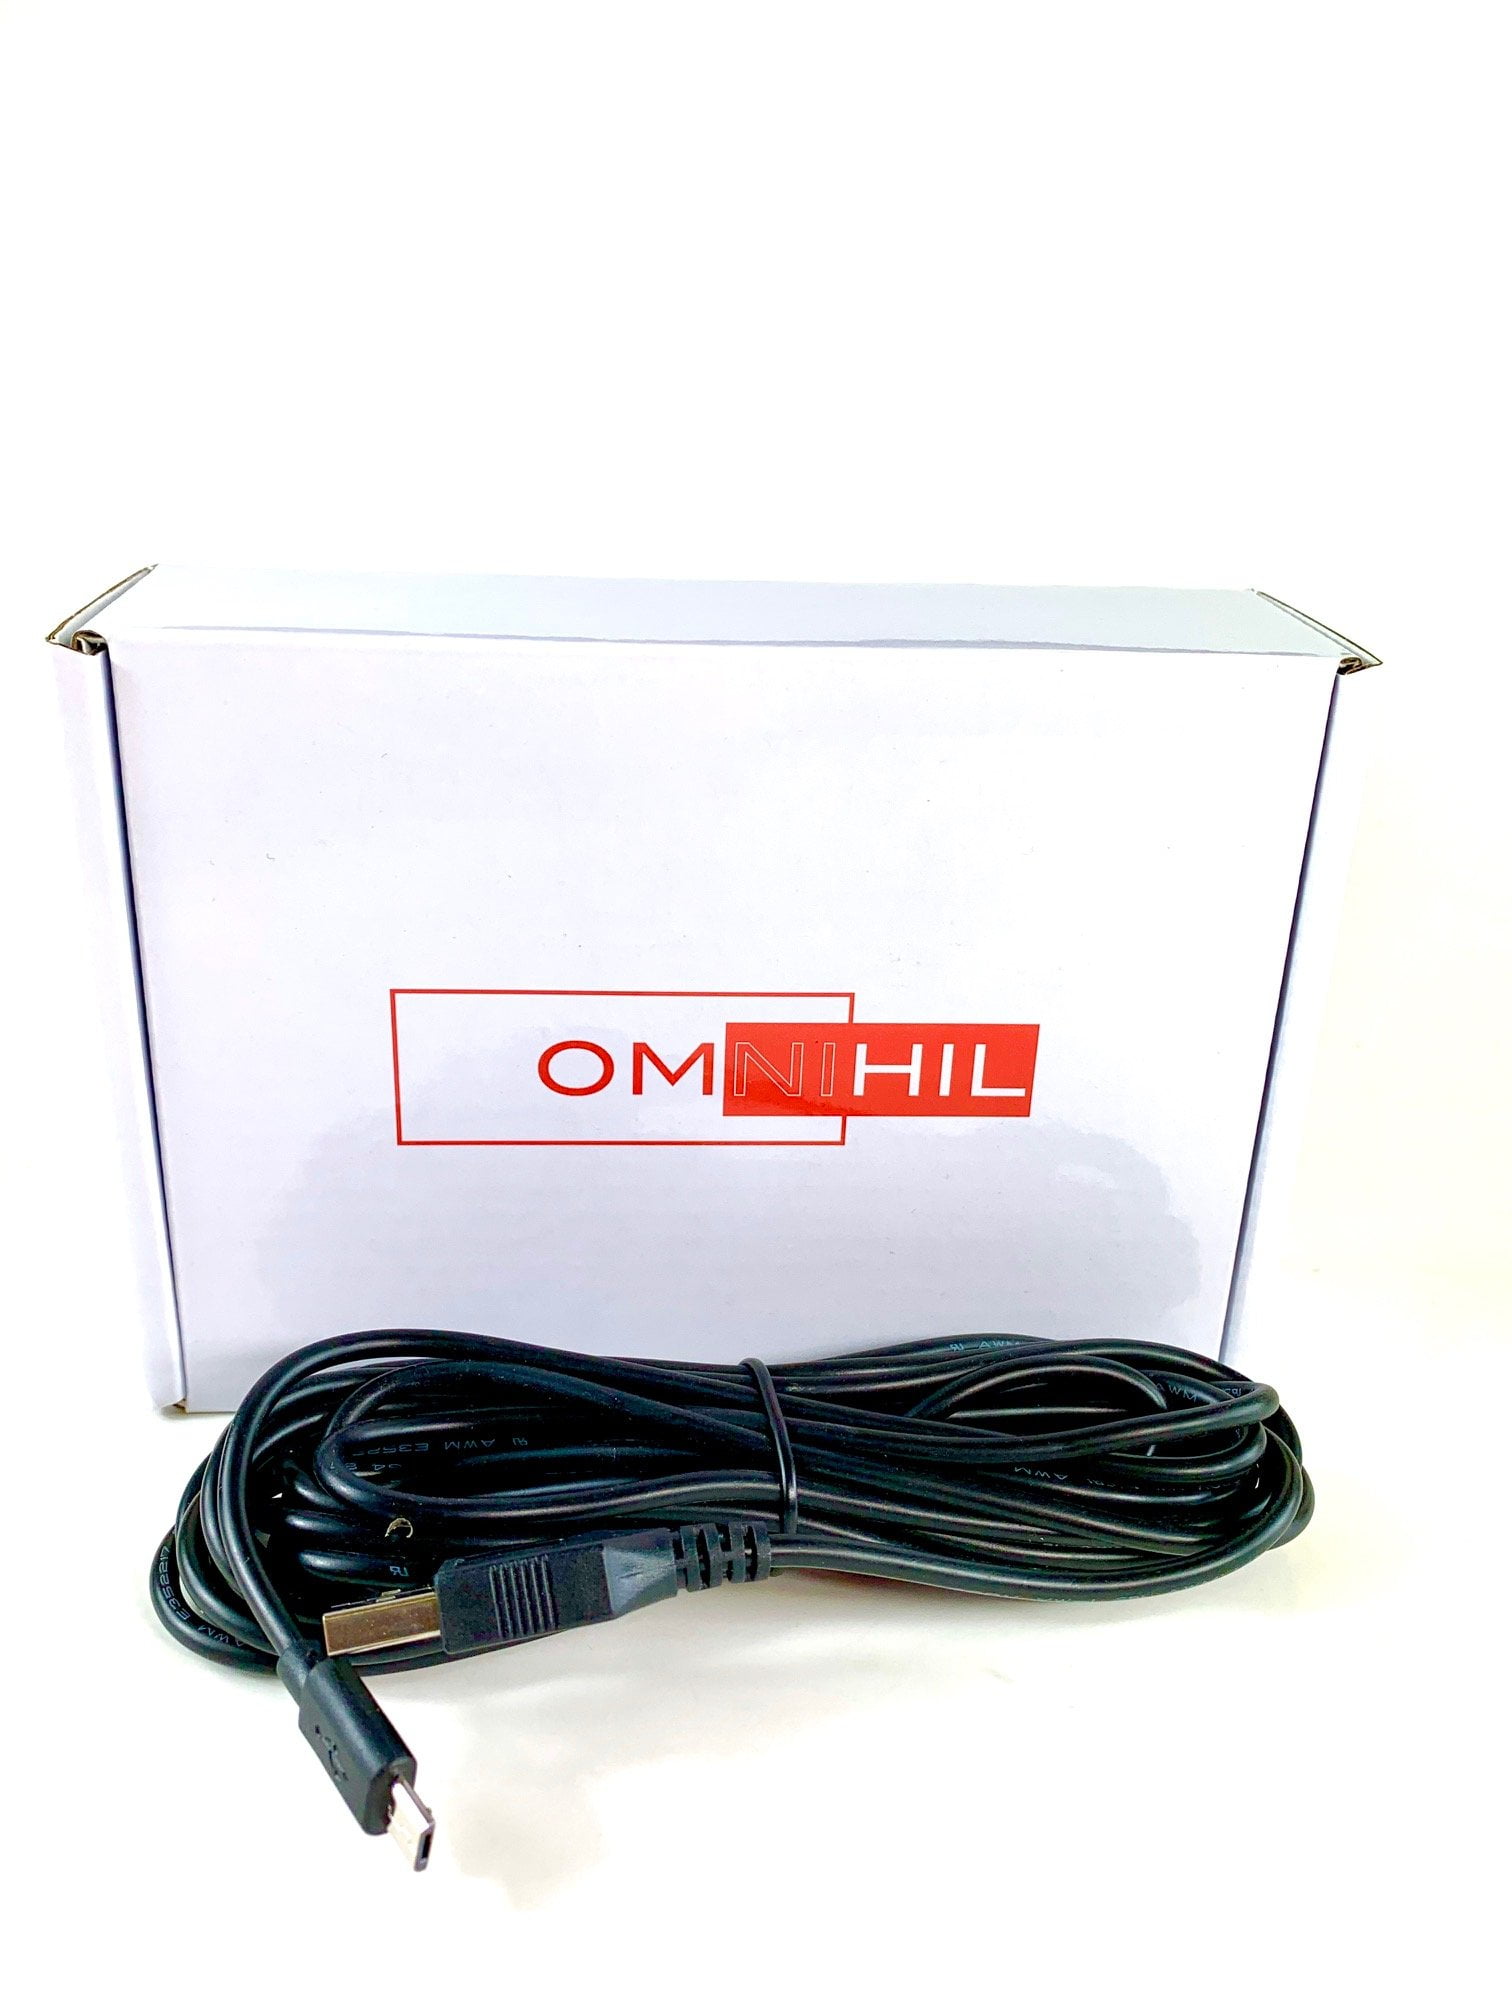 OMNIHIL 15 Feet Long High Speed USB 2.0 Cable Compatible with Verizon MHS815L Ellipsis Jetpack 